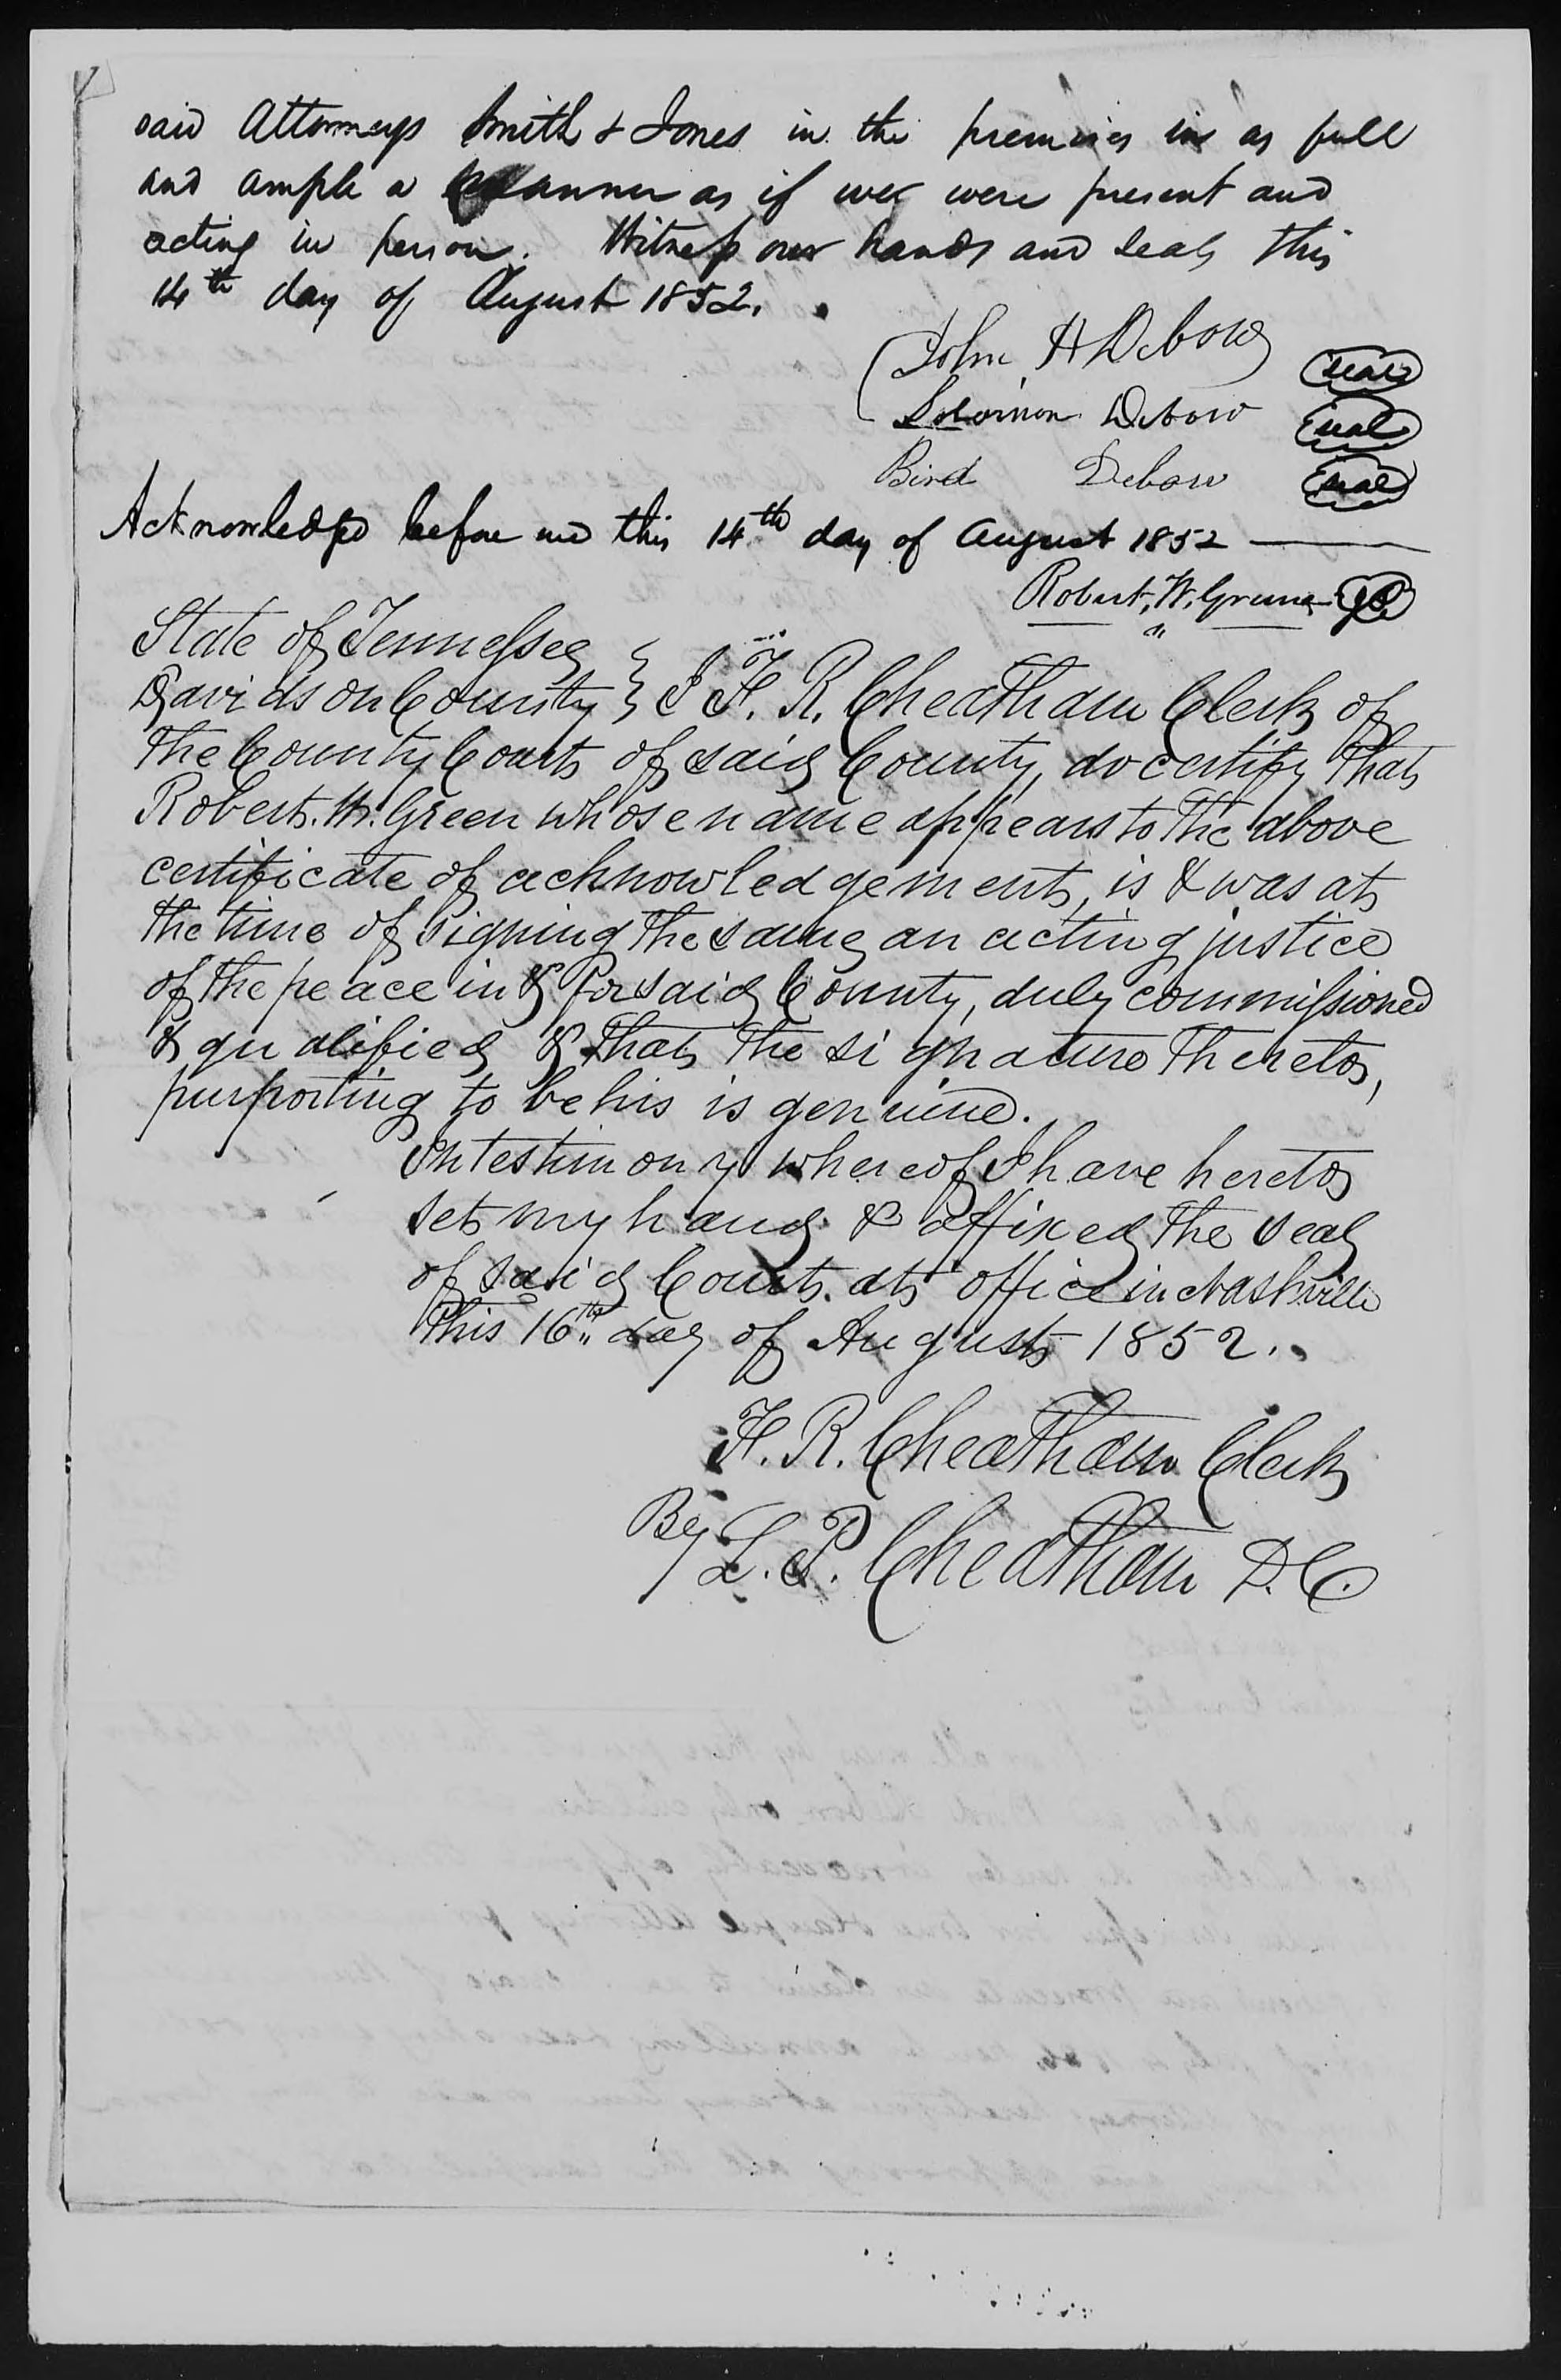 Declaration of Heirs of Rachel Debow to the U.S. Pension Office, 4 August 1852, page 2